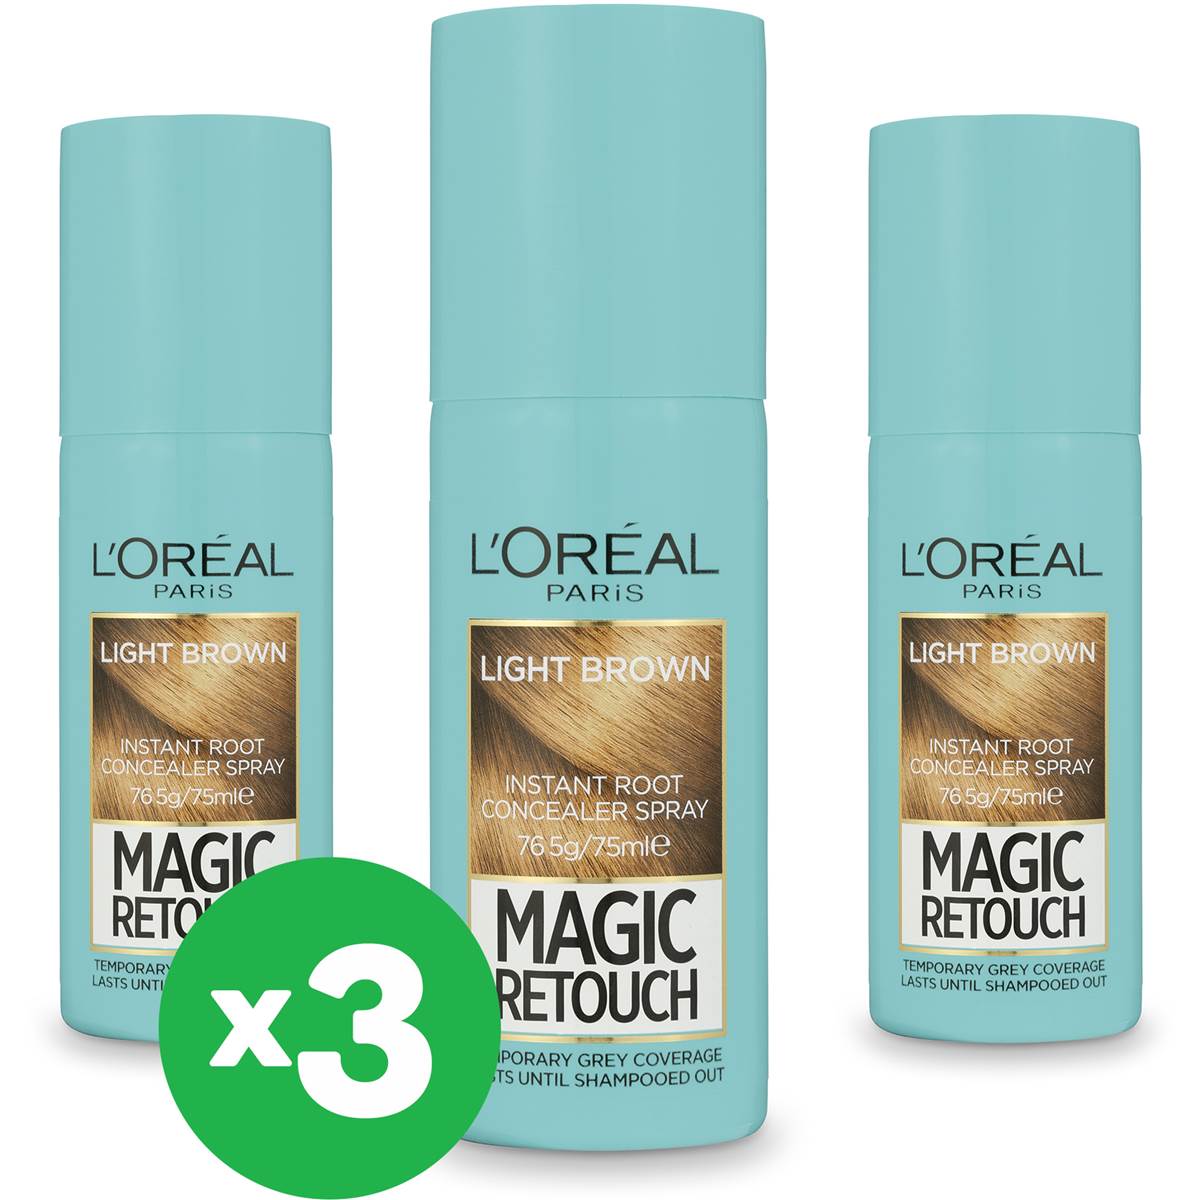 L'oreal Magic Retouch Regrowth Concealer Spray Light Brown X3 Bundle